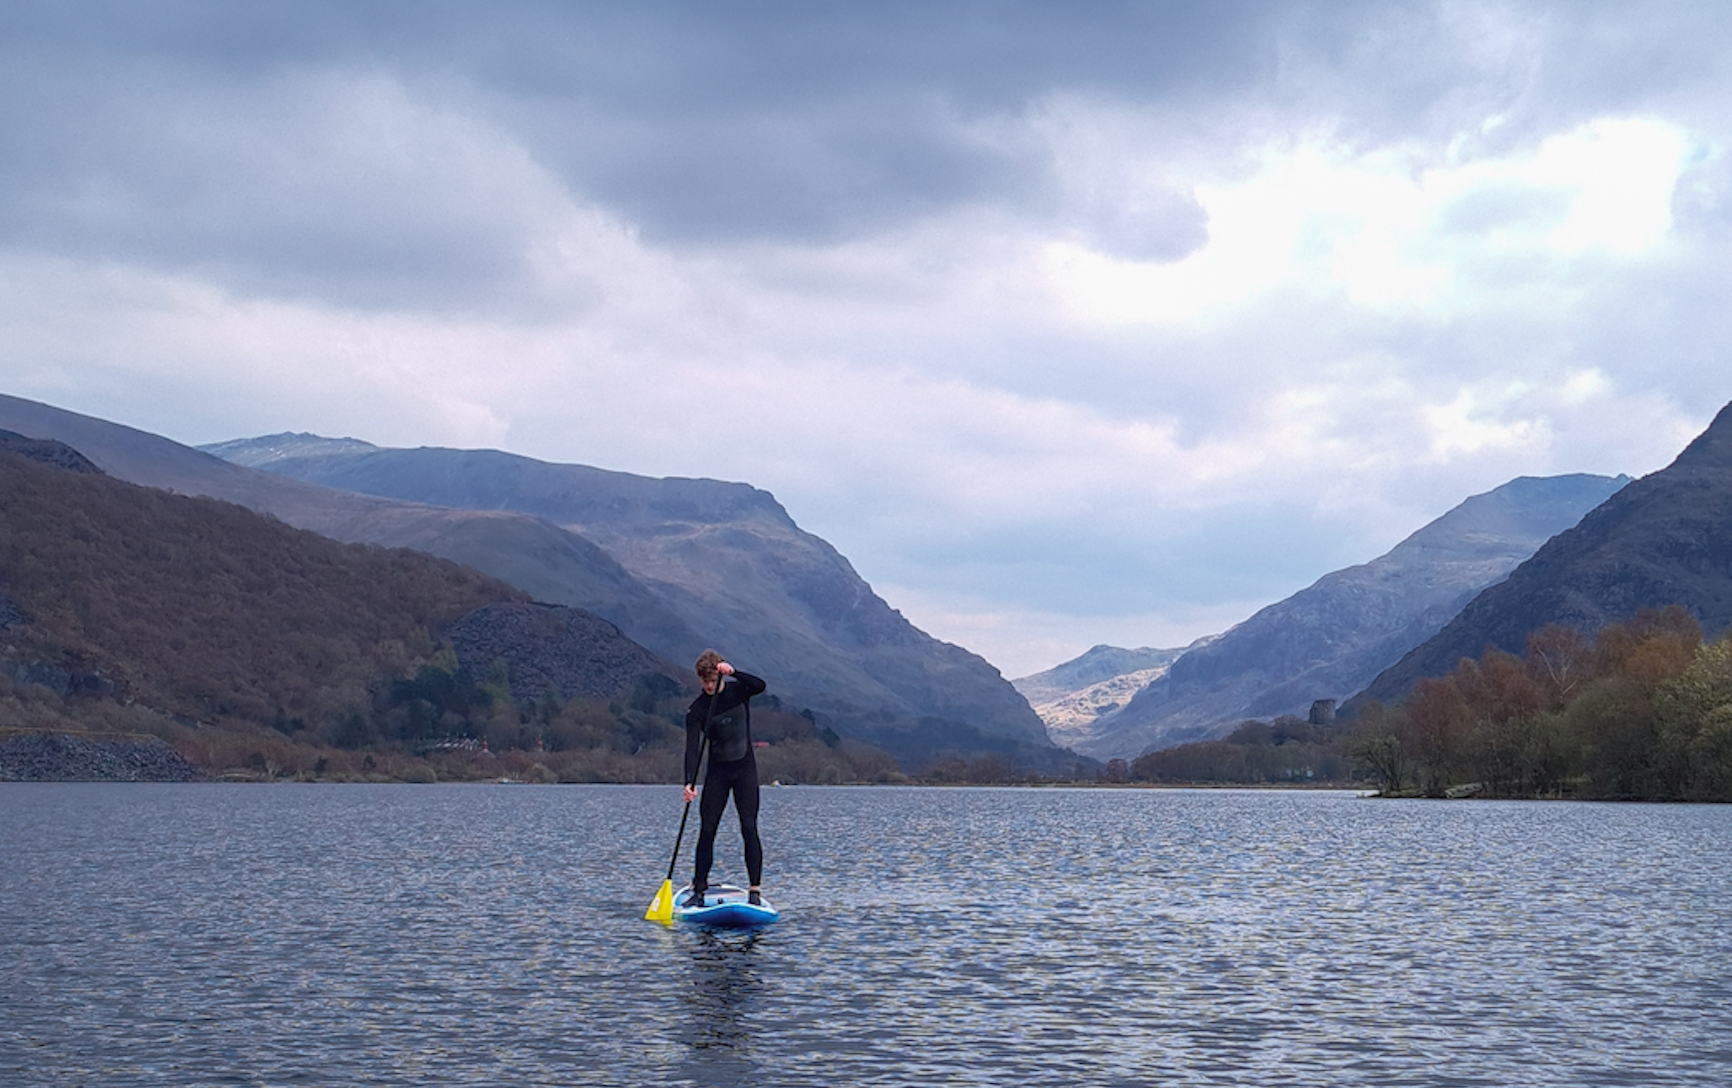 A man stand-up paddleboarding on Llyn Dinas, beneath Snowdon in Wales.